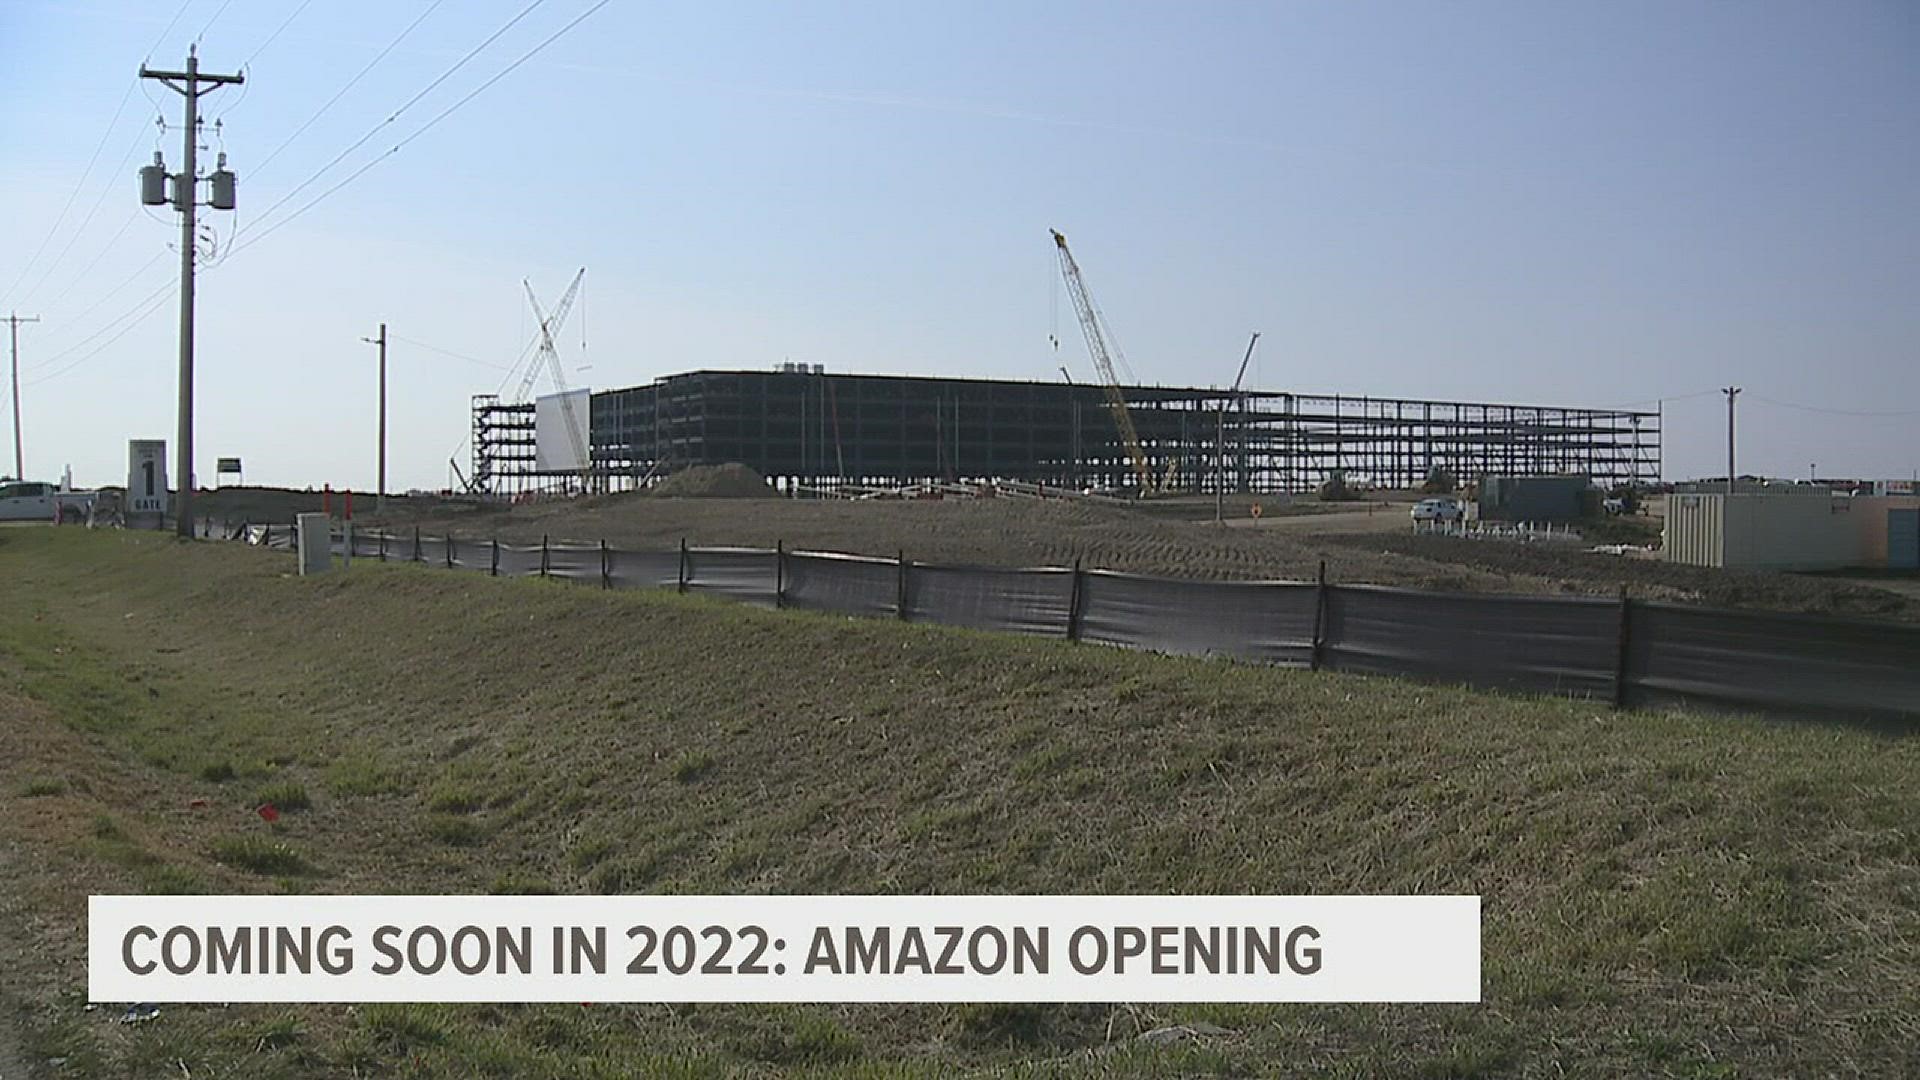 The facility is expected to open and hire 1,000 workers in Fall 2022